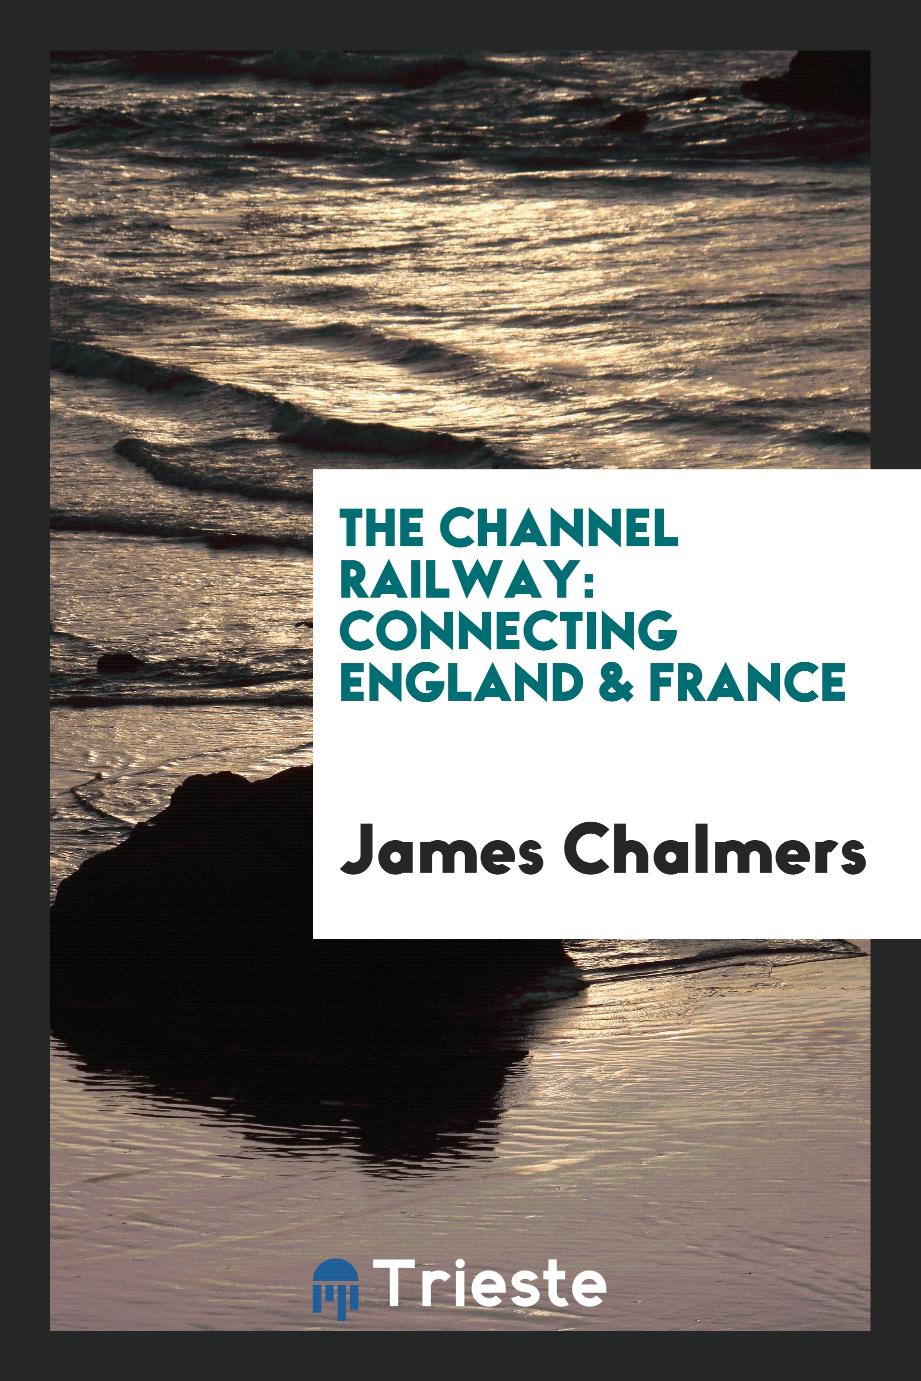 The Channel Railway: Connecting England & France